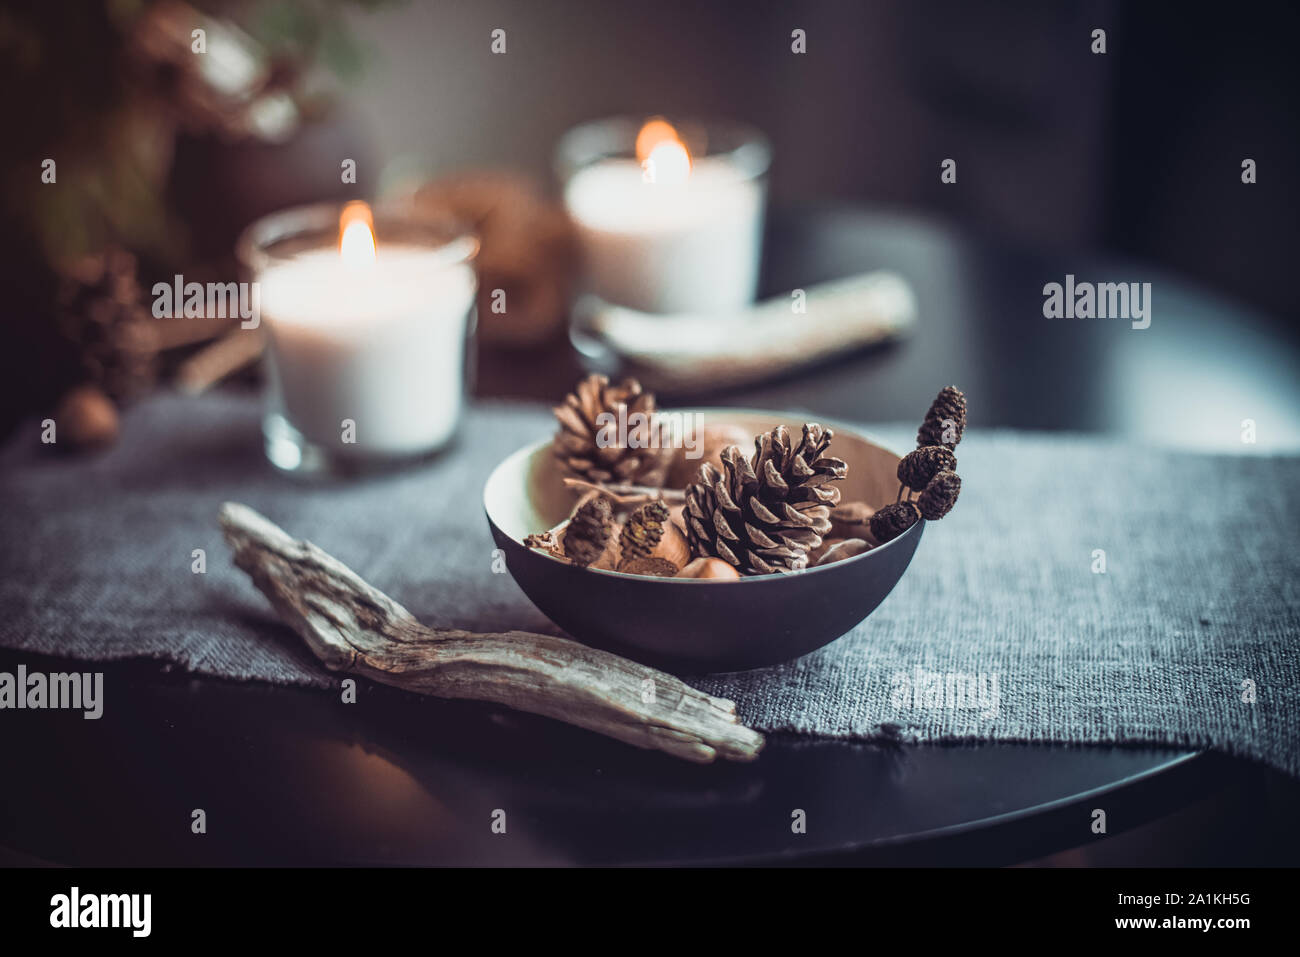 Burning candles and natural decor of cones, nuts in black bowl on the gray fabric napkin on the black table. Cozy atmosphere at home. Kinfolk Hygge Sl Stock Photo